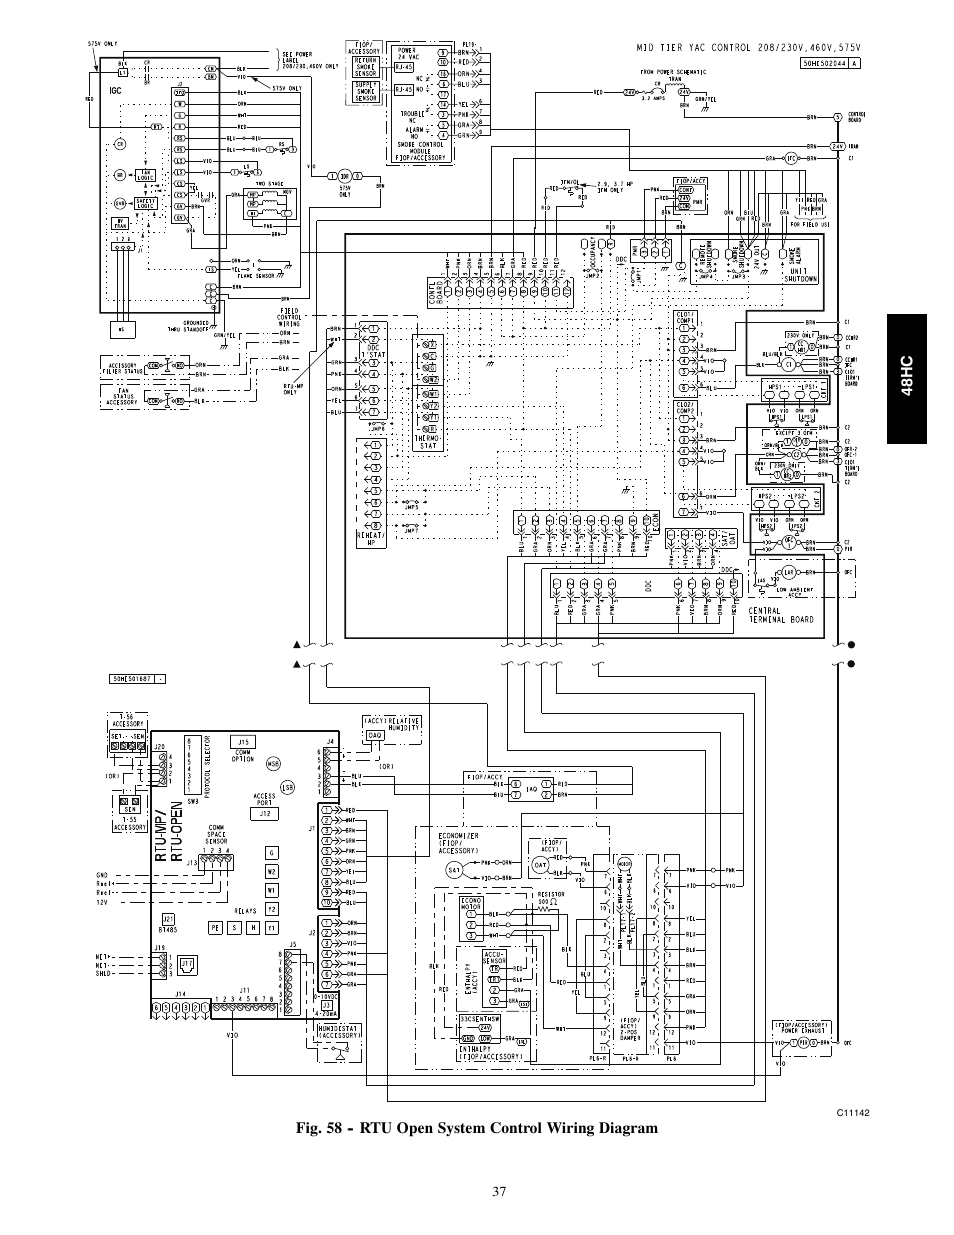 carrier 50tc with vfd wiring diagram